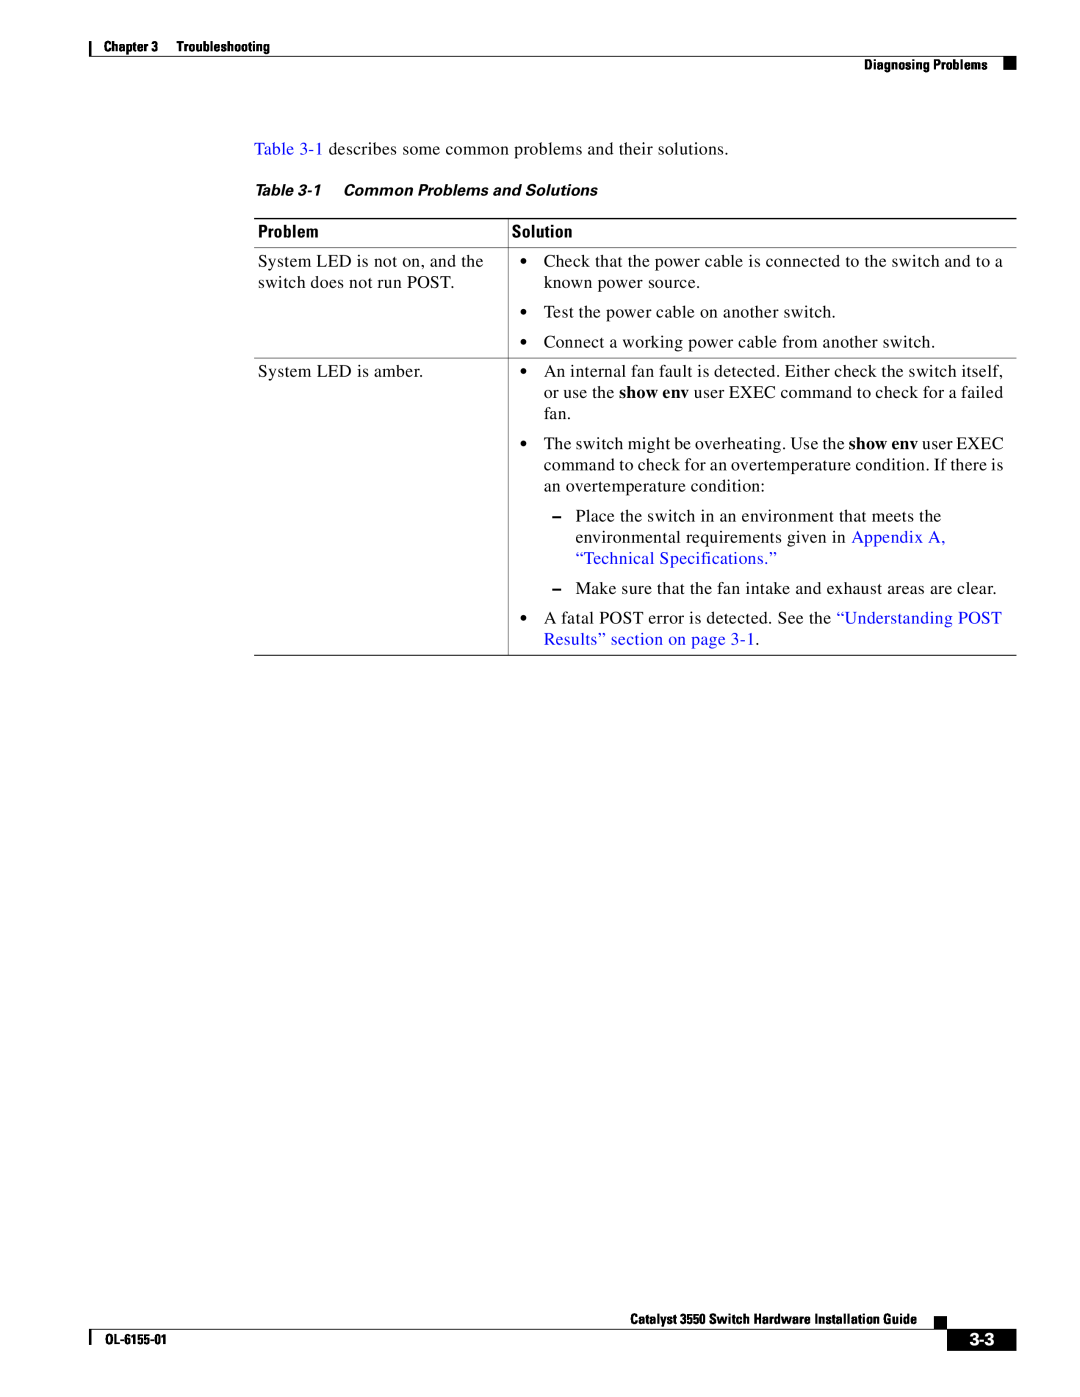 Cisco Systems 3550 manual “Technical Specifications.”, Results” section on page, Problem, Solution 